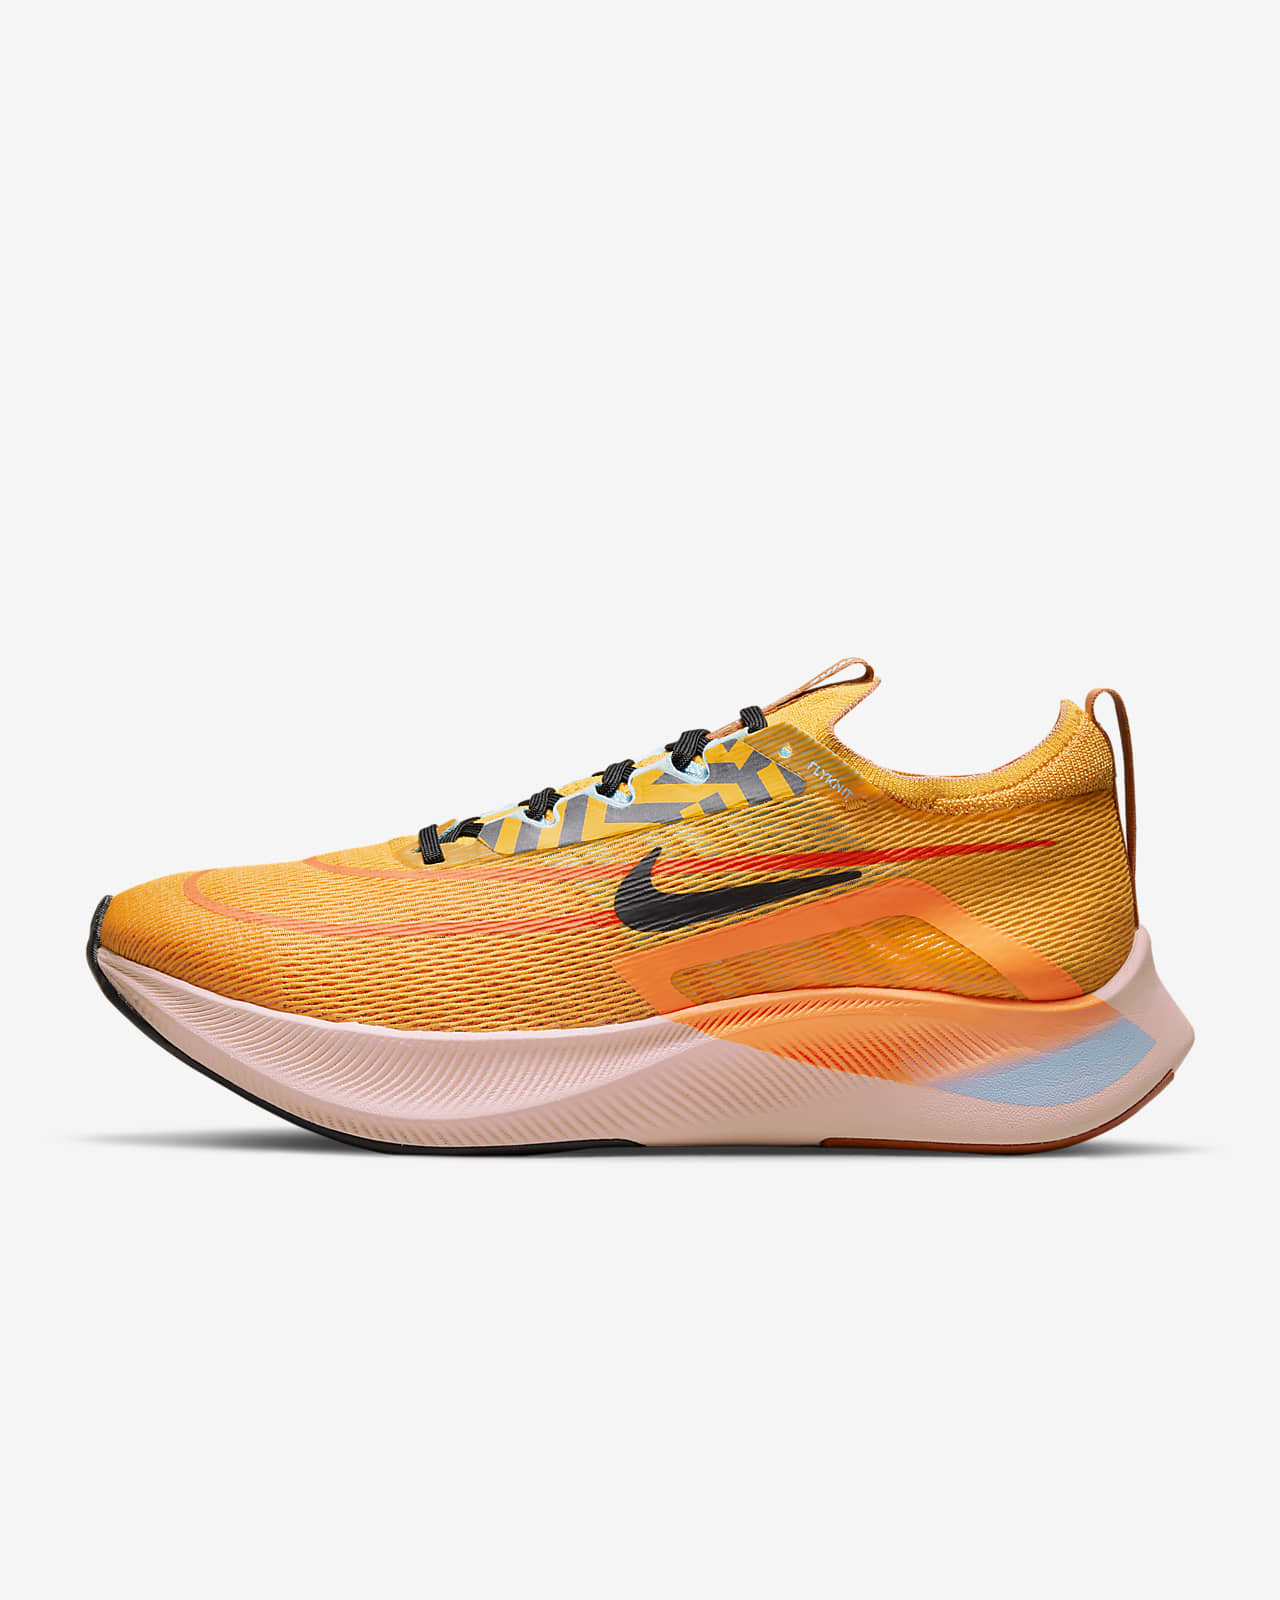 Nike Zoom Fly 4 Road Running Shoes